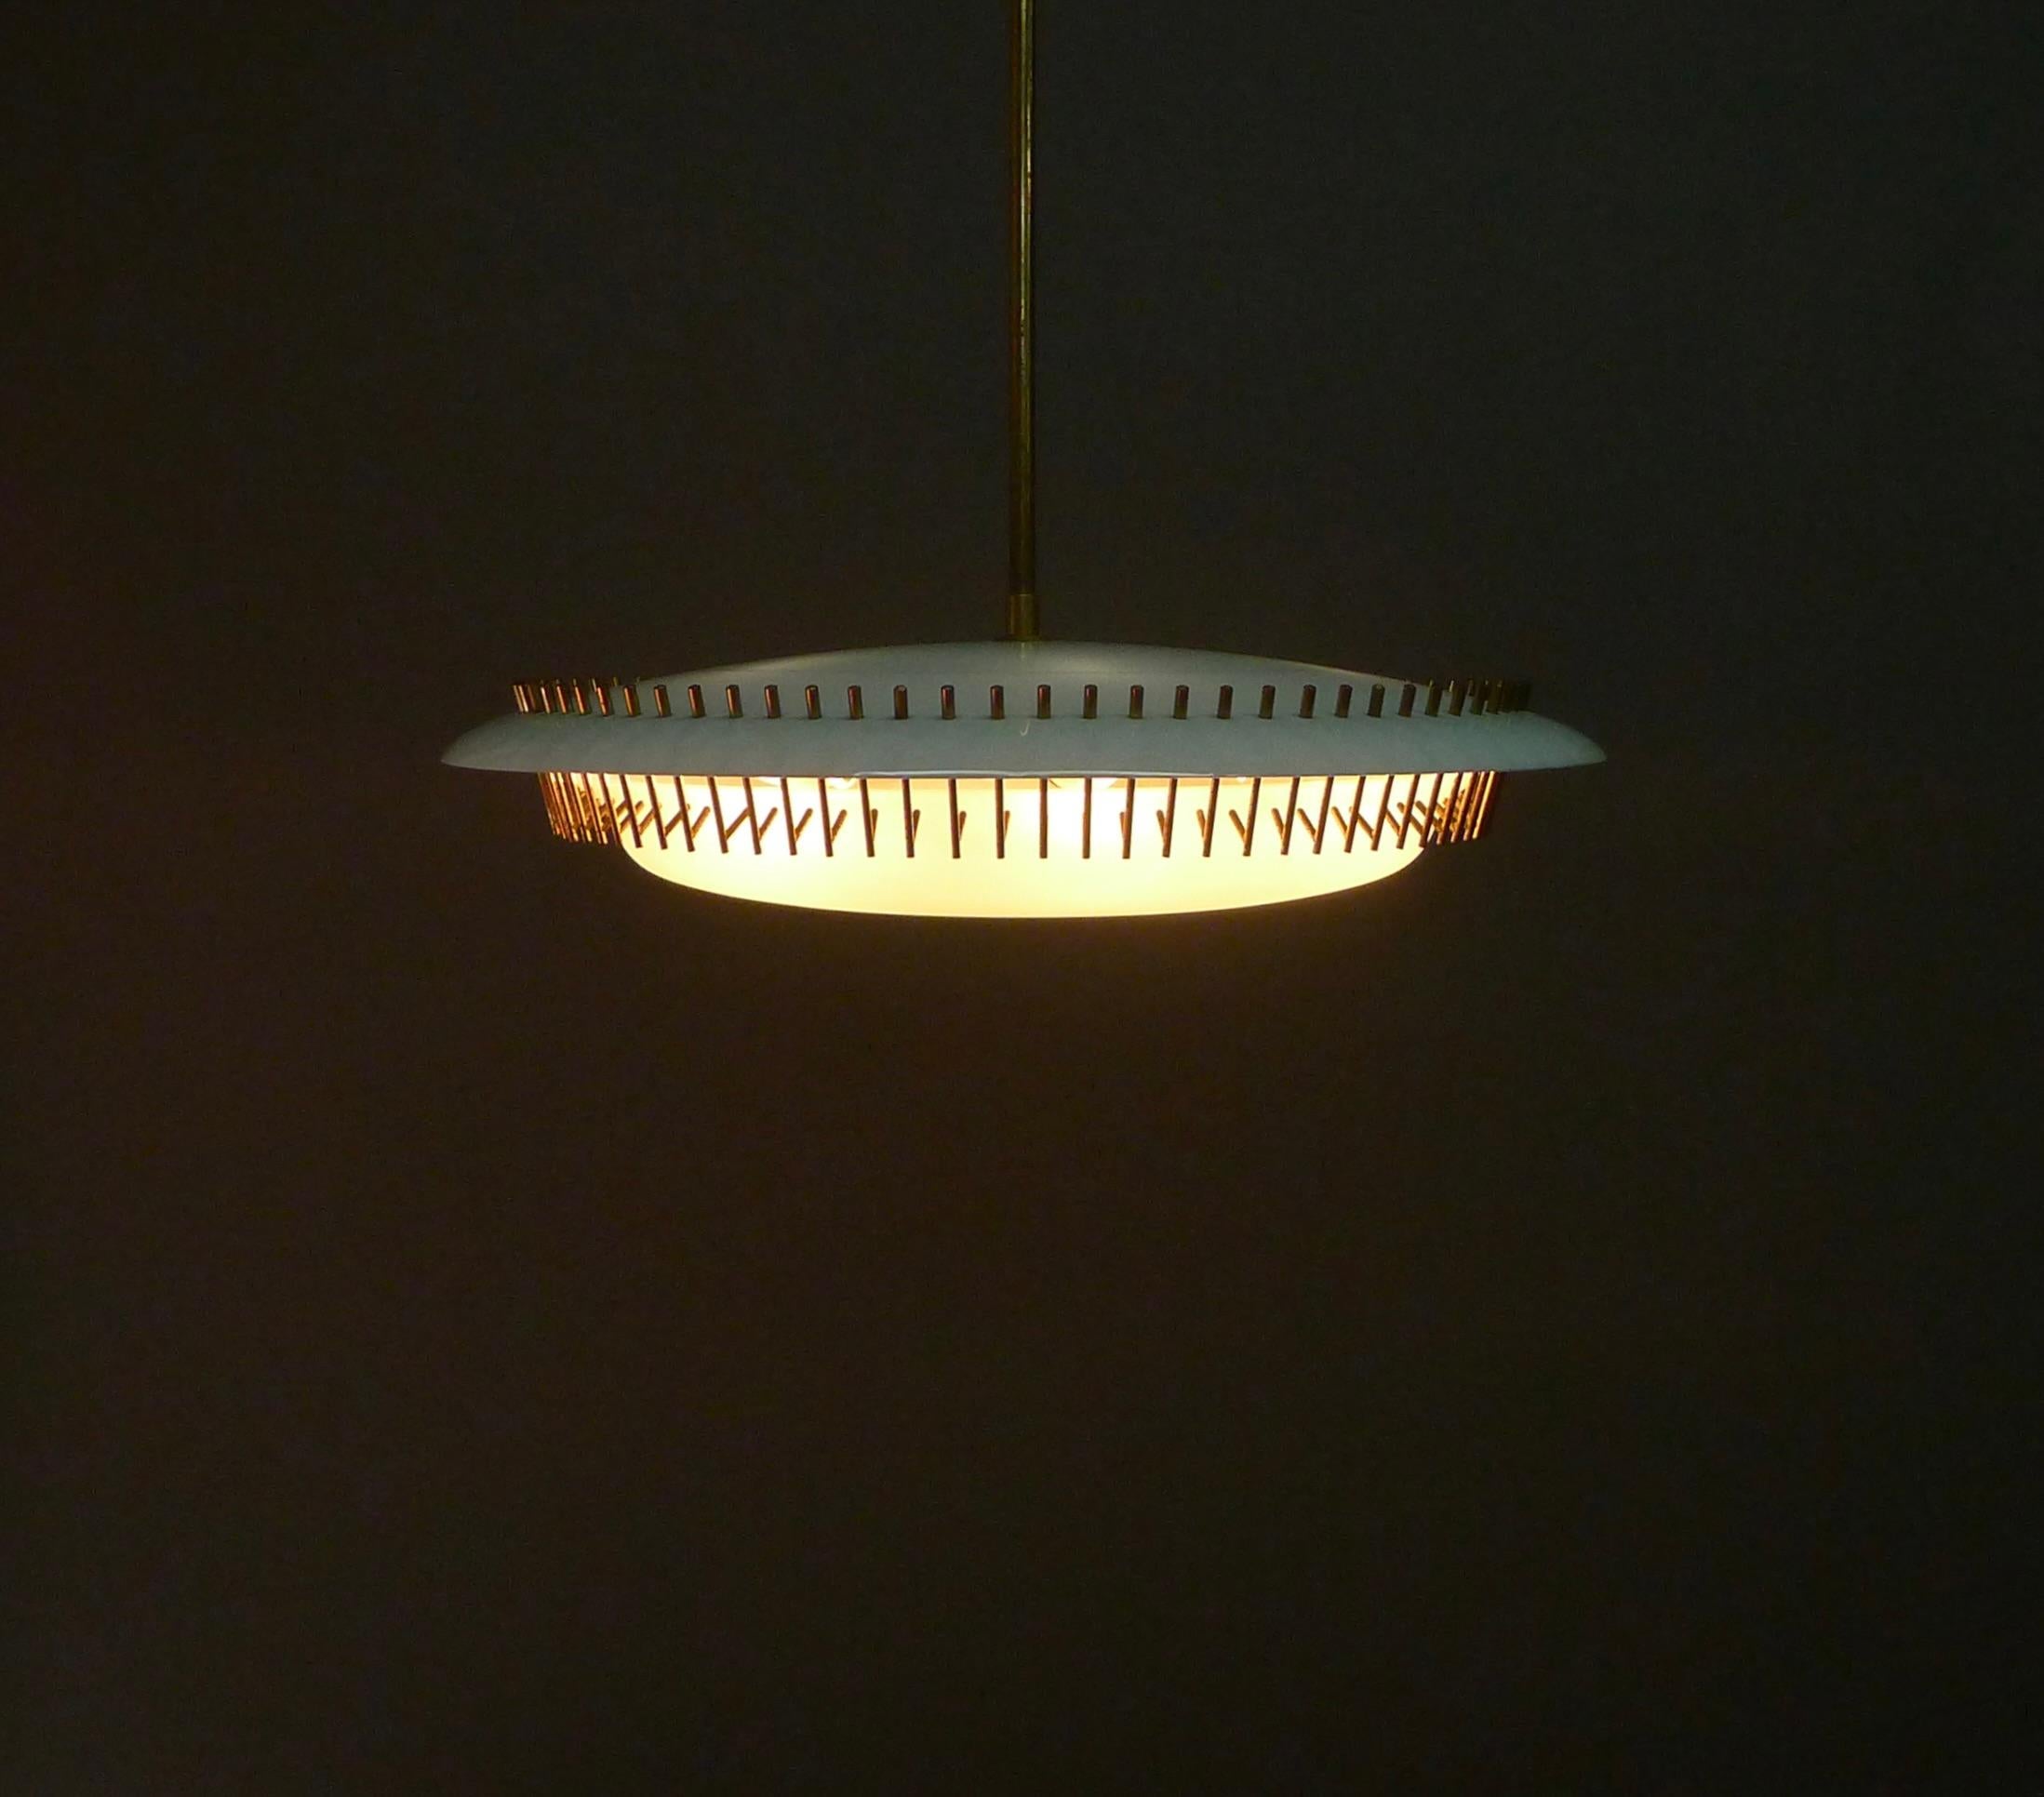 Angelo Lelii for Arredoluce, a rare model 12697 pendant light, pale turquoise  circular plastic shade above fittings for six light bulbs with lower opaline glass shade, secured with 80 brass clips

80cm high from ceiling fixture to bottom of shade,